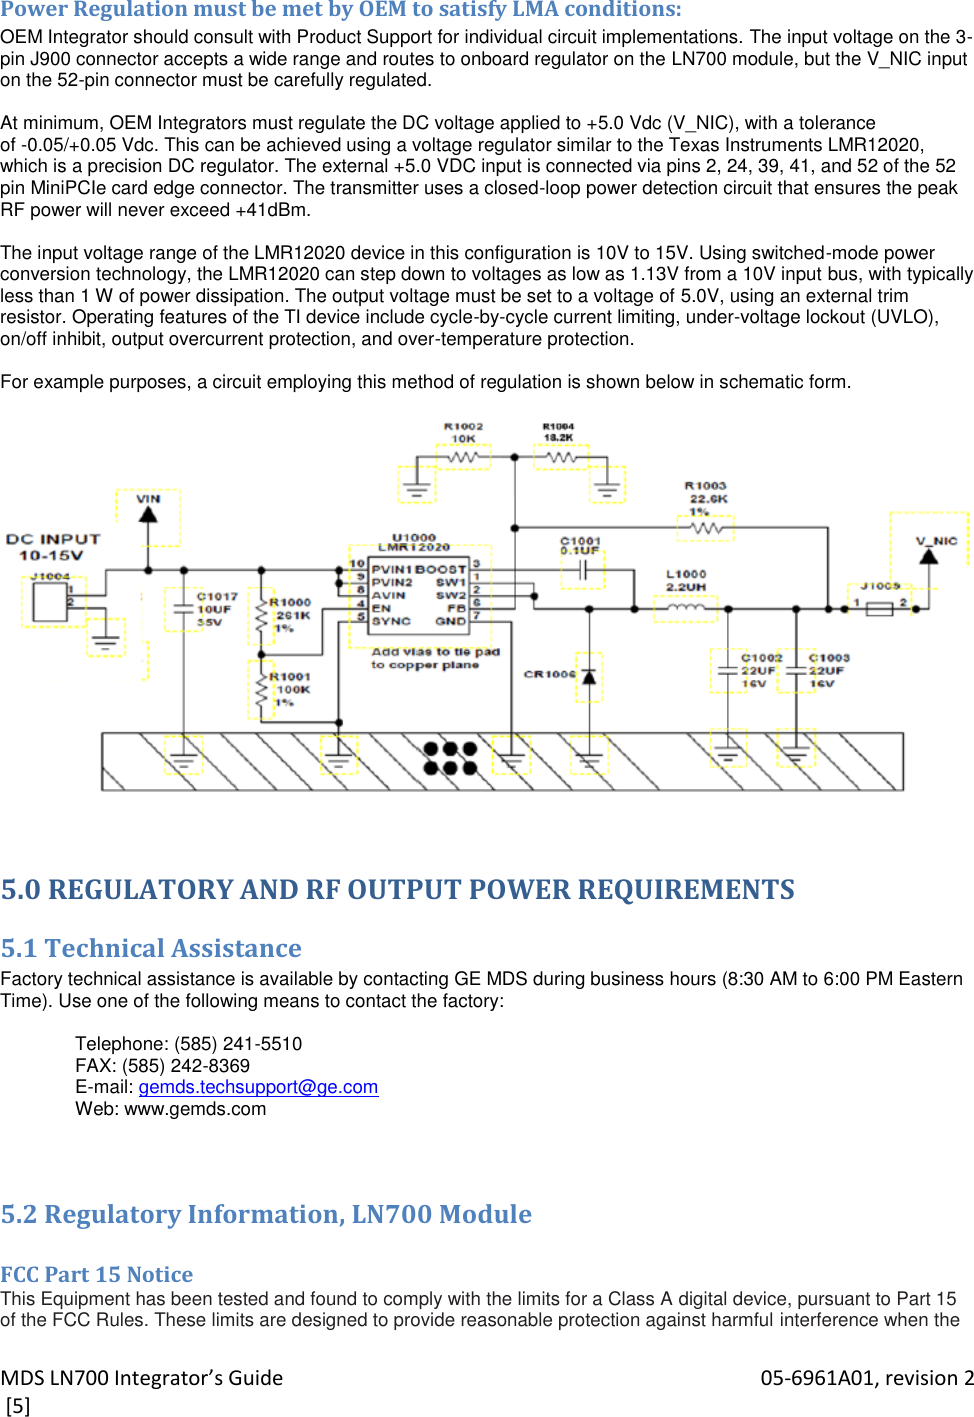 MDS LN700 Integrator’s Guide    05-6961A01, revision 2  [5] Power Regulation must be met by OEM to satisfy LMA conditions: OEM Integrator should consult with Product Support for individual circuit implementations. The input voltage on the 3-pin J900 connector accepts a wide range and routes to onboard regulator on the LN700 module, but the V_NIC input on the 52-pin connector must be carefully regulated.  At minimum, OEM Integrators must regulate the DC voltage applied to +5.0 Vdc (V_NIC), with a tolerance of -0.05/+0.05 Vdc. This can be achieved using a voltage regulator similar to the Texas Instruments LMR12020, which is a precision DC regulator. The external +5.0 VDC input is connected via pins 2, 24, 39, 41, and 52 of the 52 pin MiniPCIe card edge connector. The transmitter uses a closed-loop power detection circuit that ensures the peak RF power will never exceed +41dBm.  The input voltage range of the LMR12020 device in this configuration is 10V to 15V. Using switched-mode power conversion technology, the LMR12020 can step down to voltages as low as 1.13V from a 10V input bus, with typically less than 1 W of power dissipation. The output voltage must be set to a voltage of 5.0V, using an external trim resistor. Operating features of the TI device include cycle-by-cycle current limiting, under-voltage lockout (UVLO), on/off inhibit, output overcurrent protection, and over-temperature protection.  For example purposes, a circuit employing this method of regulation is shown below in schematic form.    5.0 REGULATORY AND RF OUTPUT POWER REQUIREMENTS 5.1 Technical Assistance Factory technical assistance is available by contacting GE MDS during business hours (8:30 AM to 6:00 PM Eastern Time). Use one of the following means to contact the factory:  Telephone: (585) 241-5510 FAX: (585) 242-8369 E-mail: gemds.techsupport@ge.com Web: www.gemds.com  5.2 Regulatory Information, LN700 Module  FCC Part 15 Notice This Equipment has been tested and found to comply with the limits for a Class A digital device, pursuant to Part 15 of the FCC Rules. These limits are designed to provide reasonable protection against harmful interference when the 